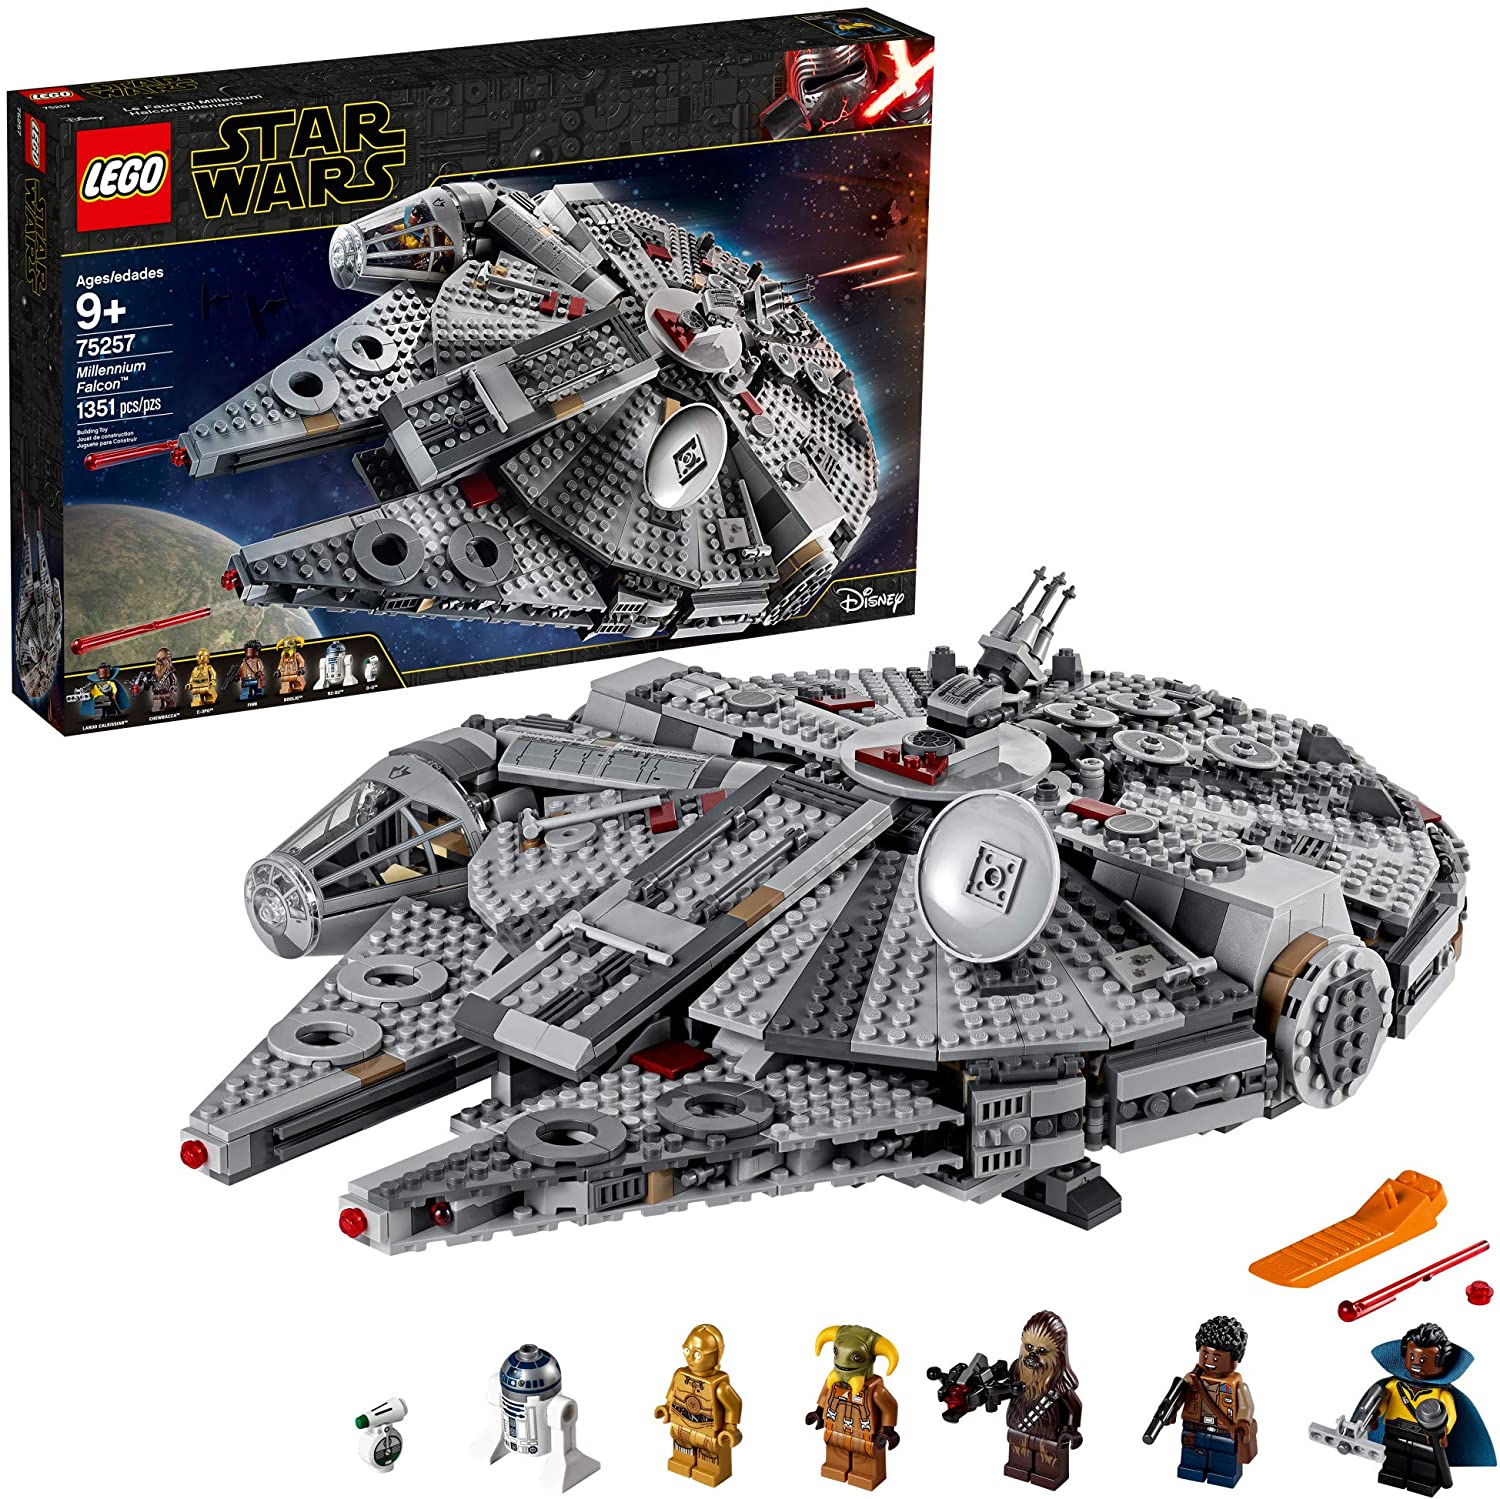 Lego Star Wars The Rise of Skywalker Millennium Falcon Starship Model Building Kit and Minifigures, 1351 Pieces, -- ANB Baby